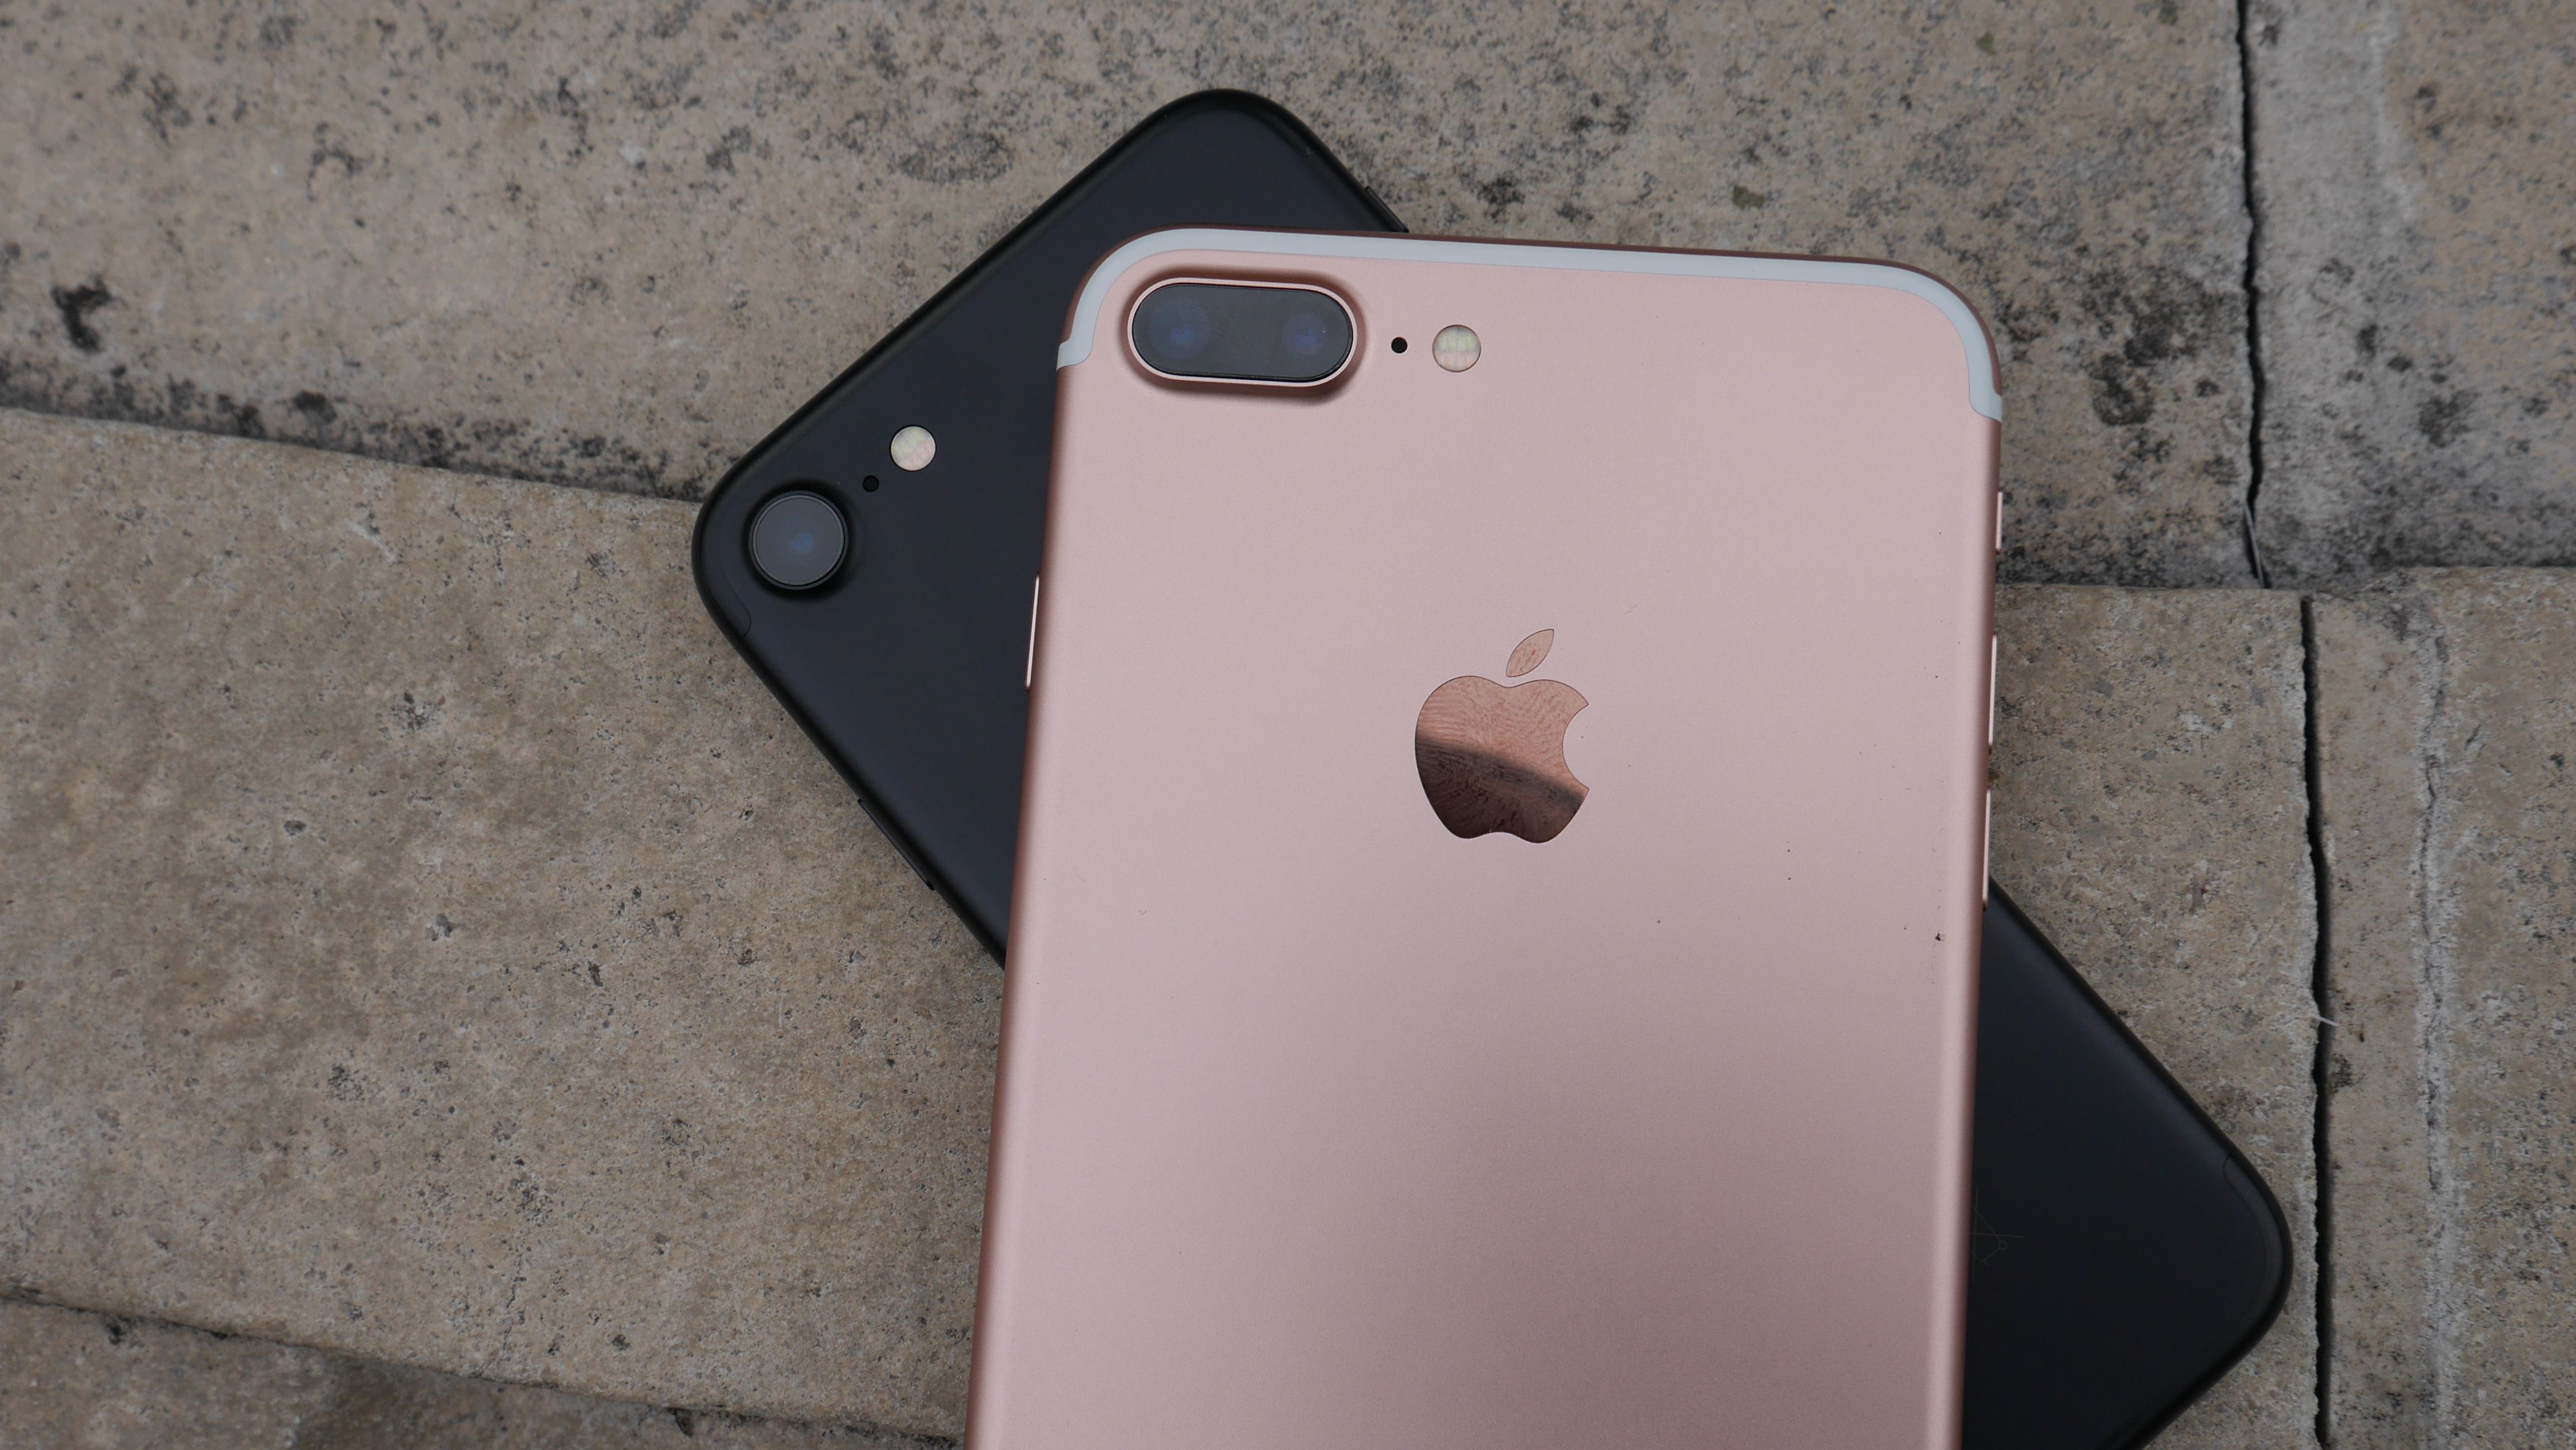 iPhone 7 vs iPhone 7 Plus: What's the difference and which is best